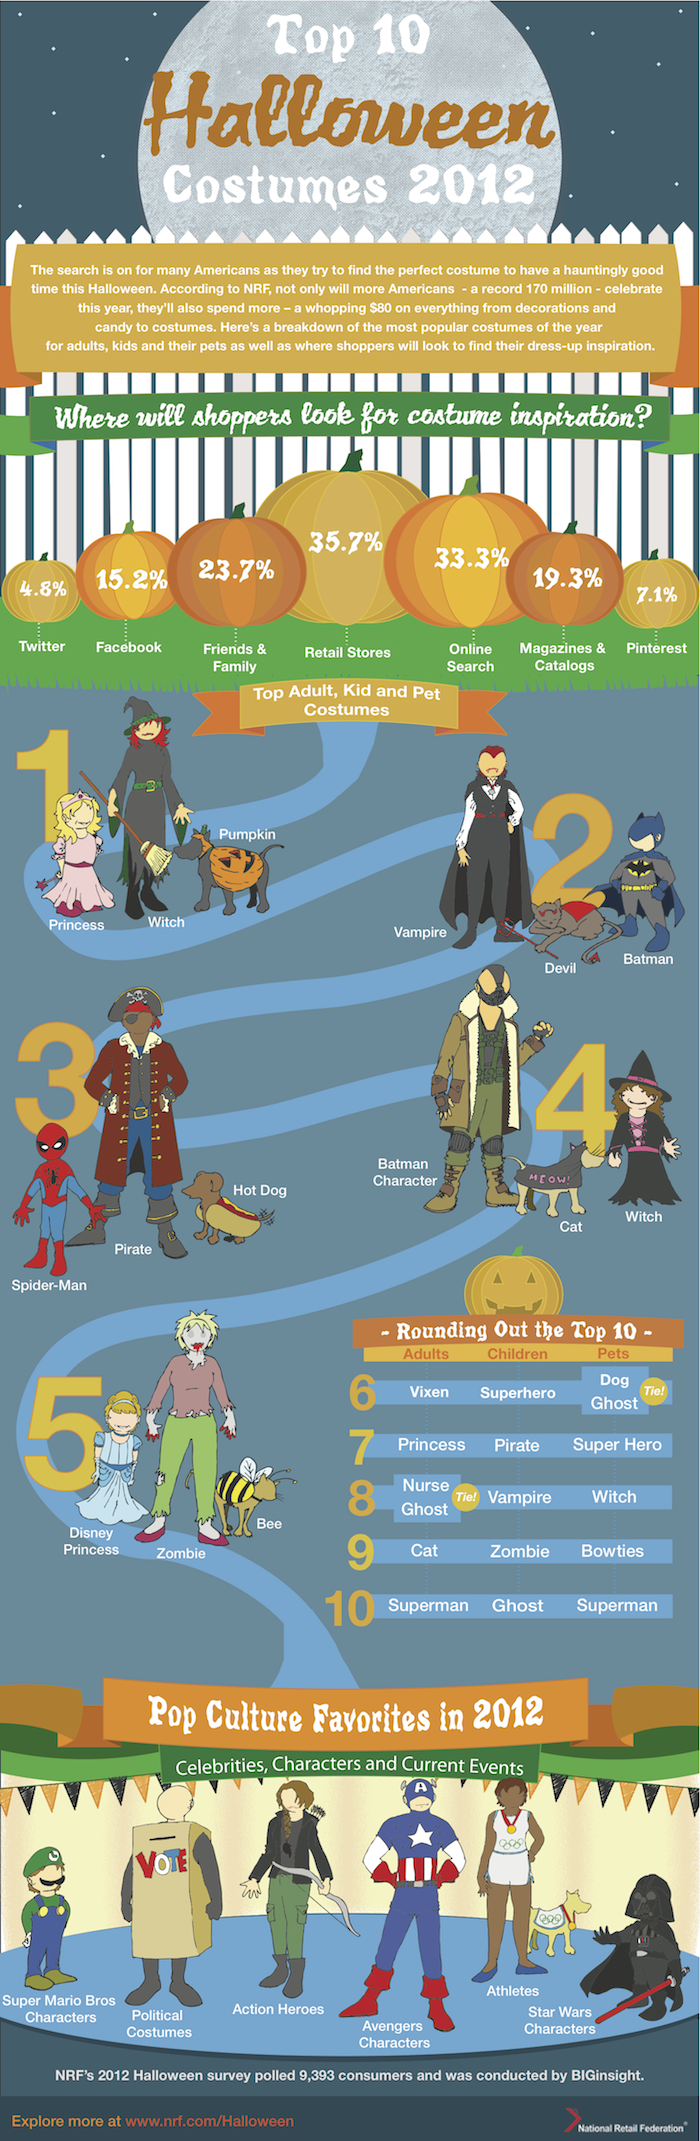 Top Halloween costumes for adults, kids and pets in 2012 – Infographic